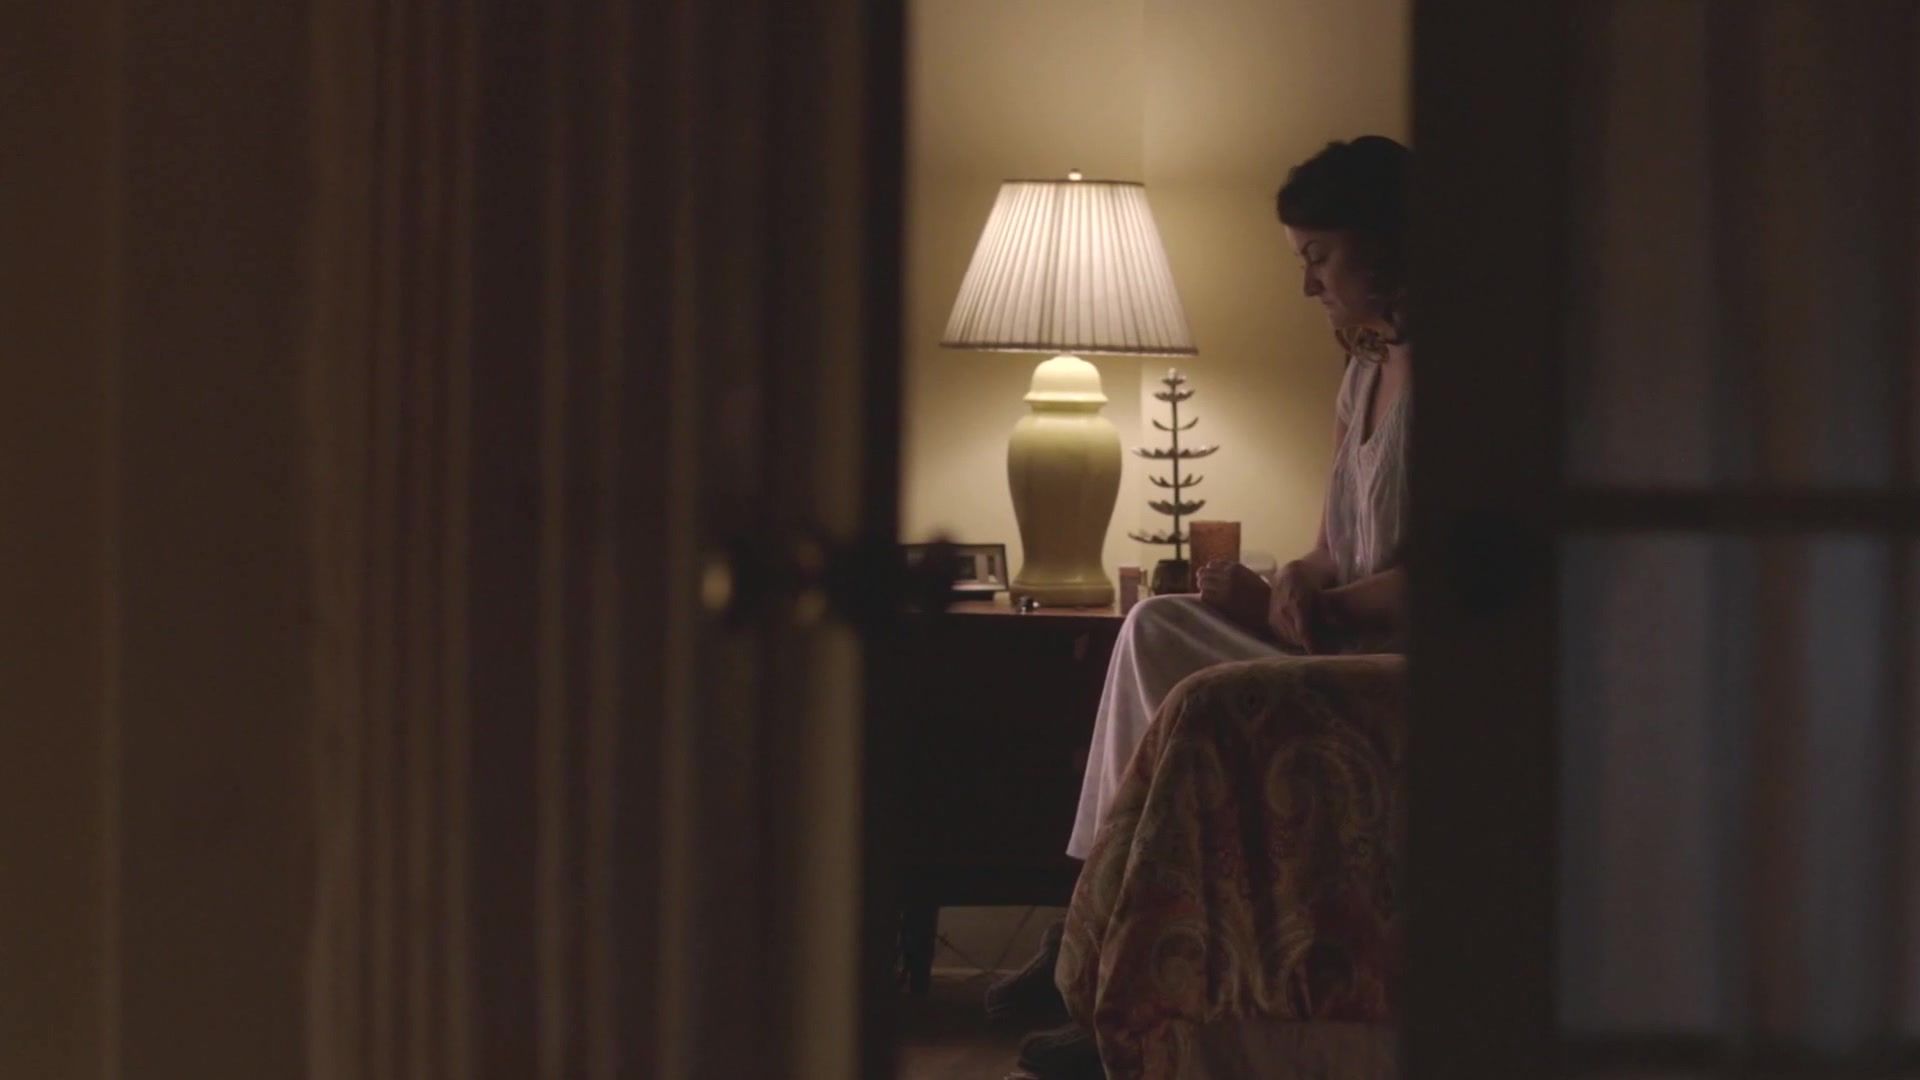 Gayporn Keri Russell nude - The Americans S04E05 (2016) HBrowse - 1